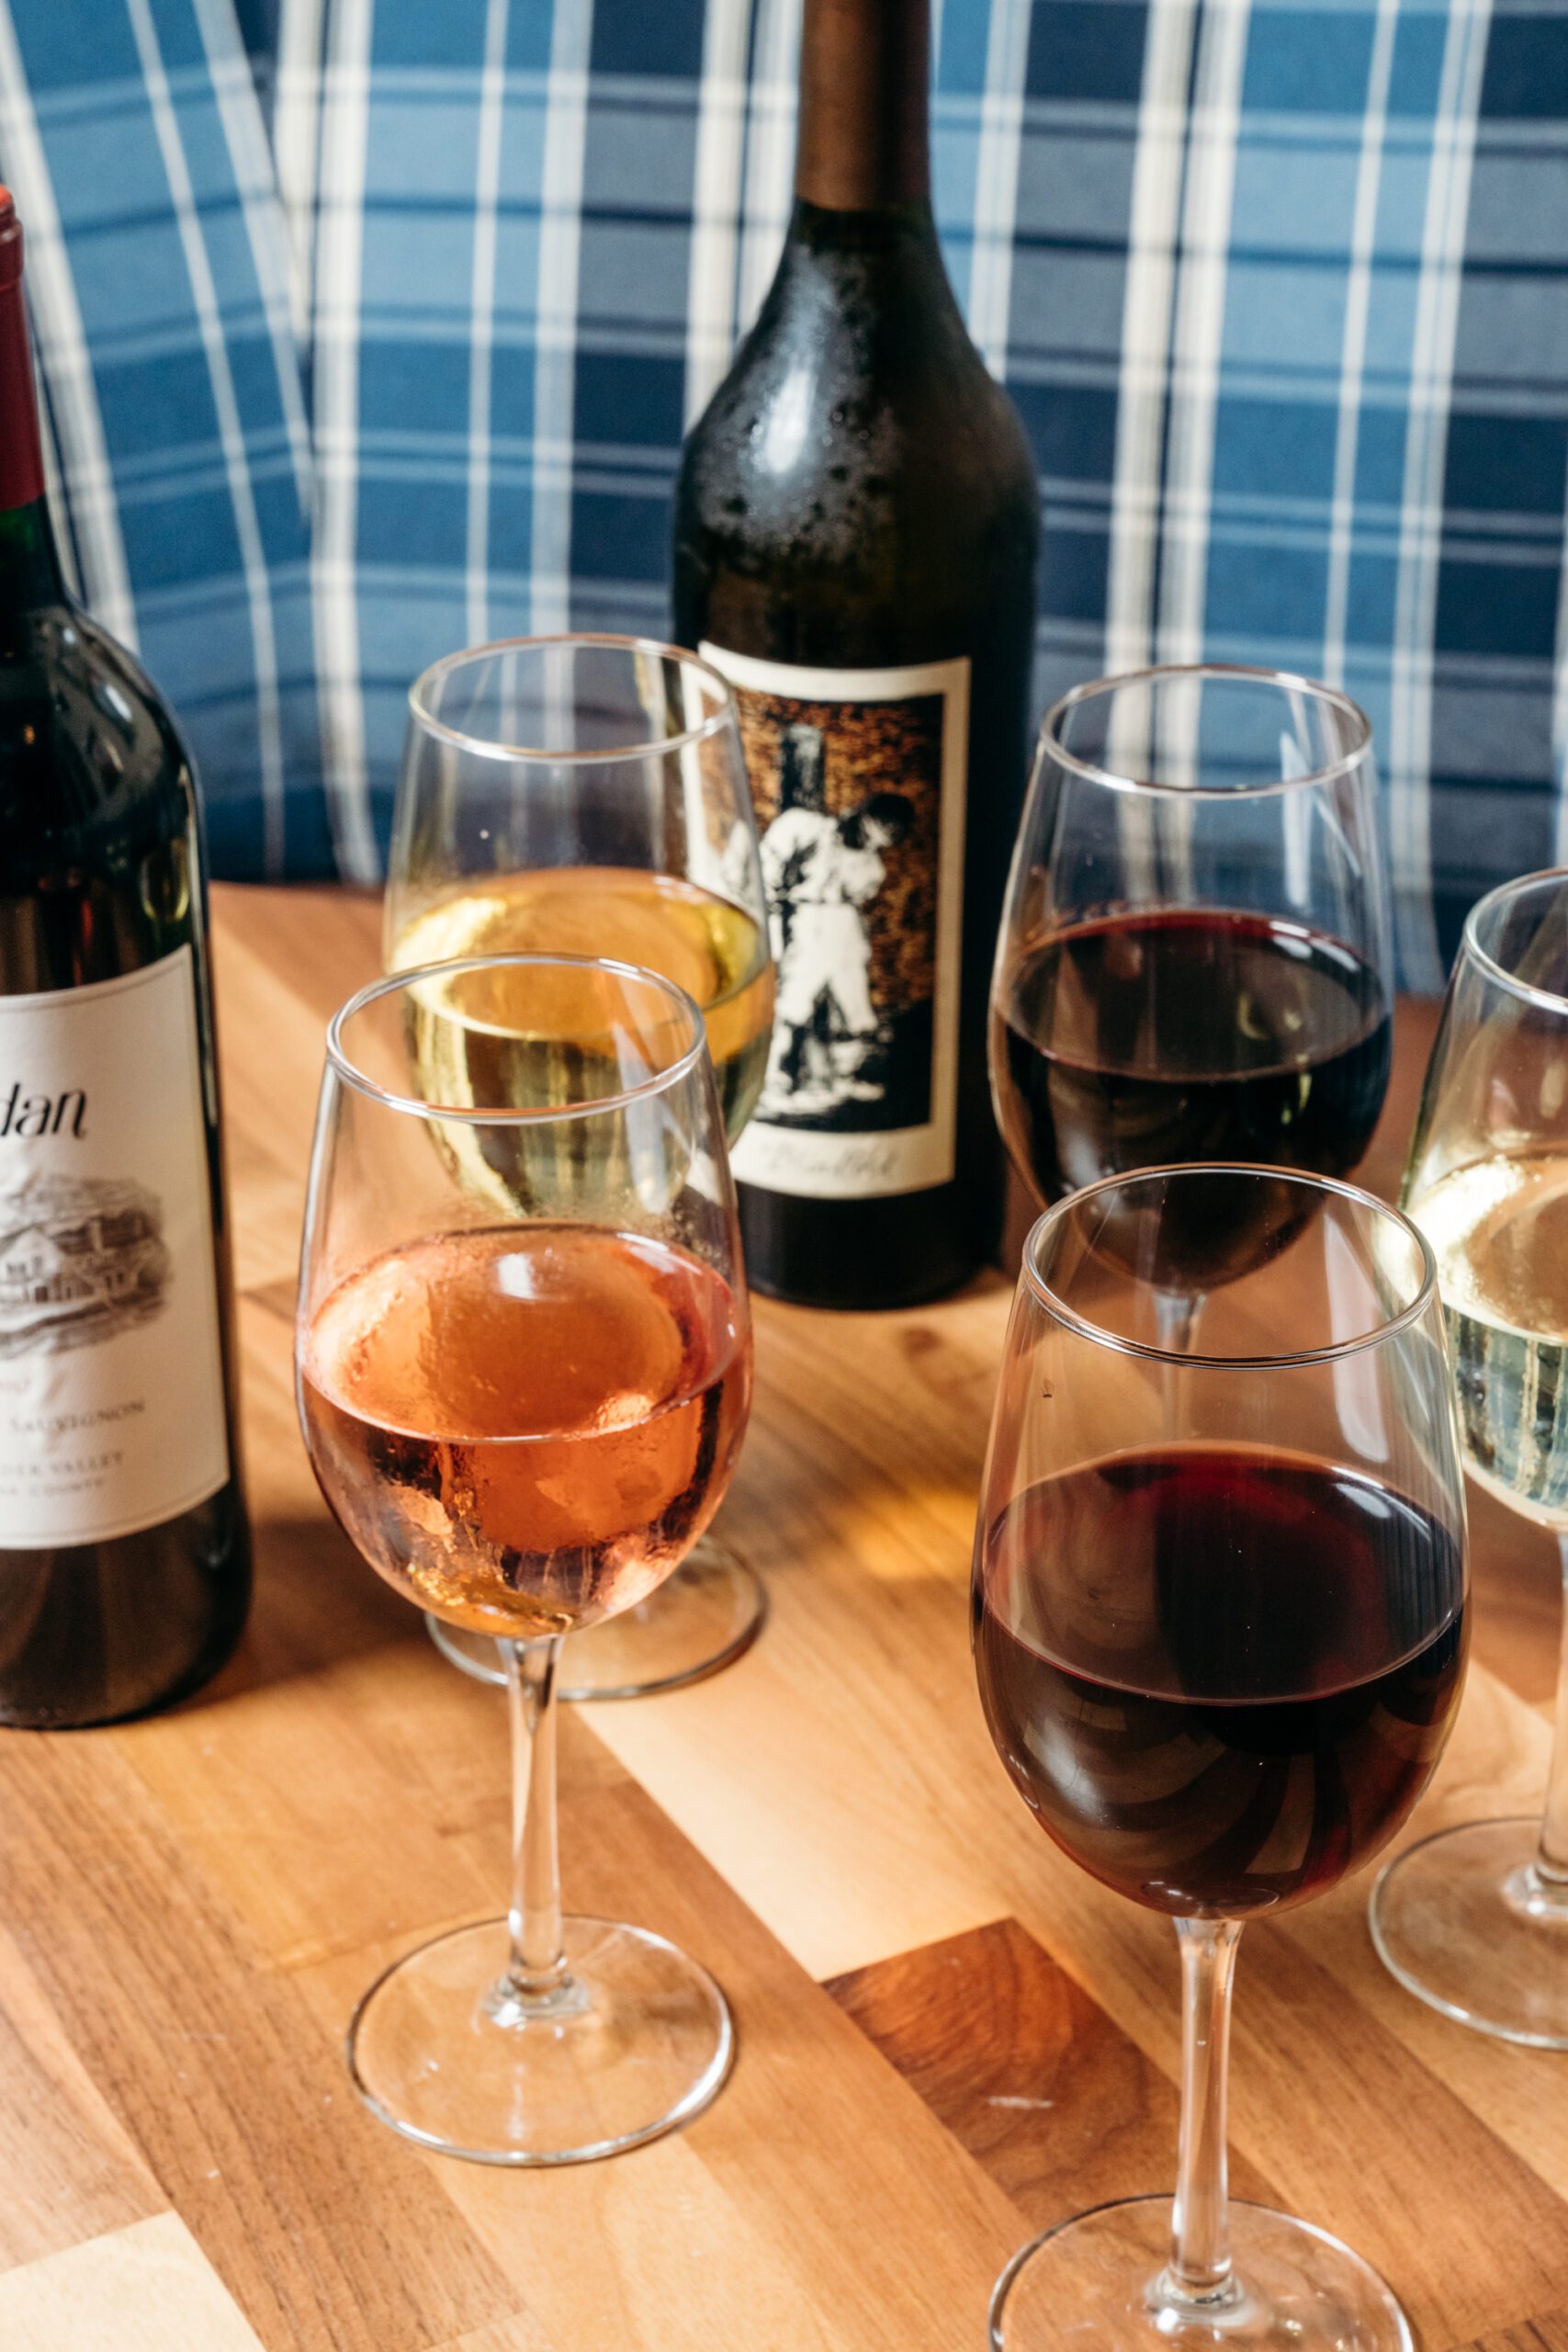 A couple of bottles of wine and five glasses of red, white and rose wine on a table.